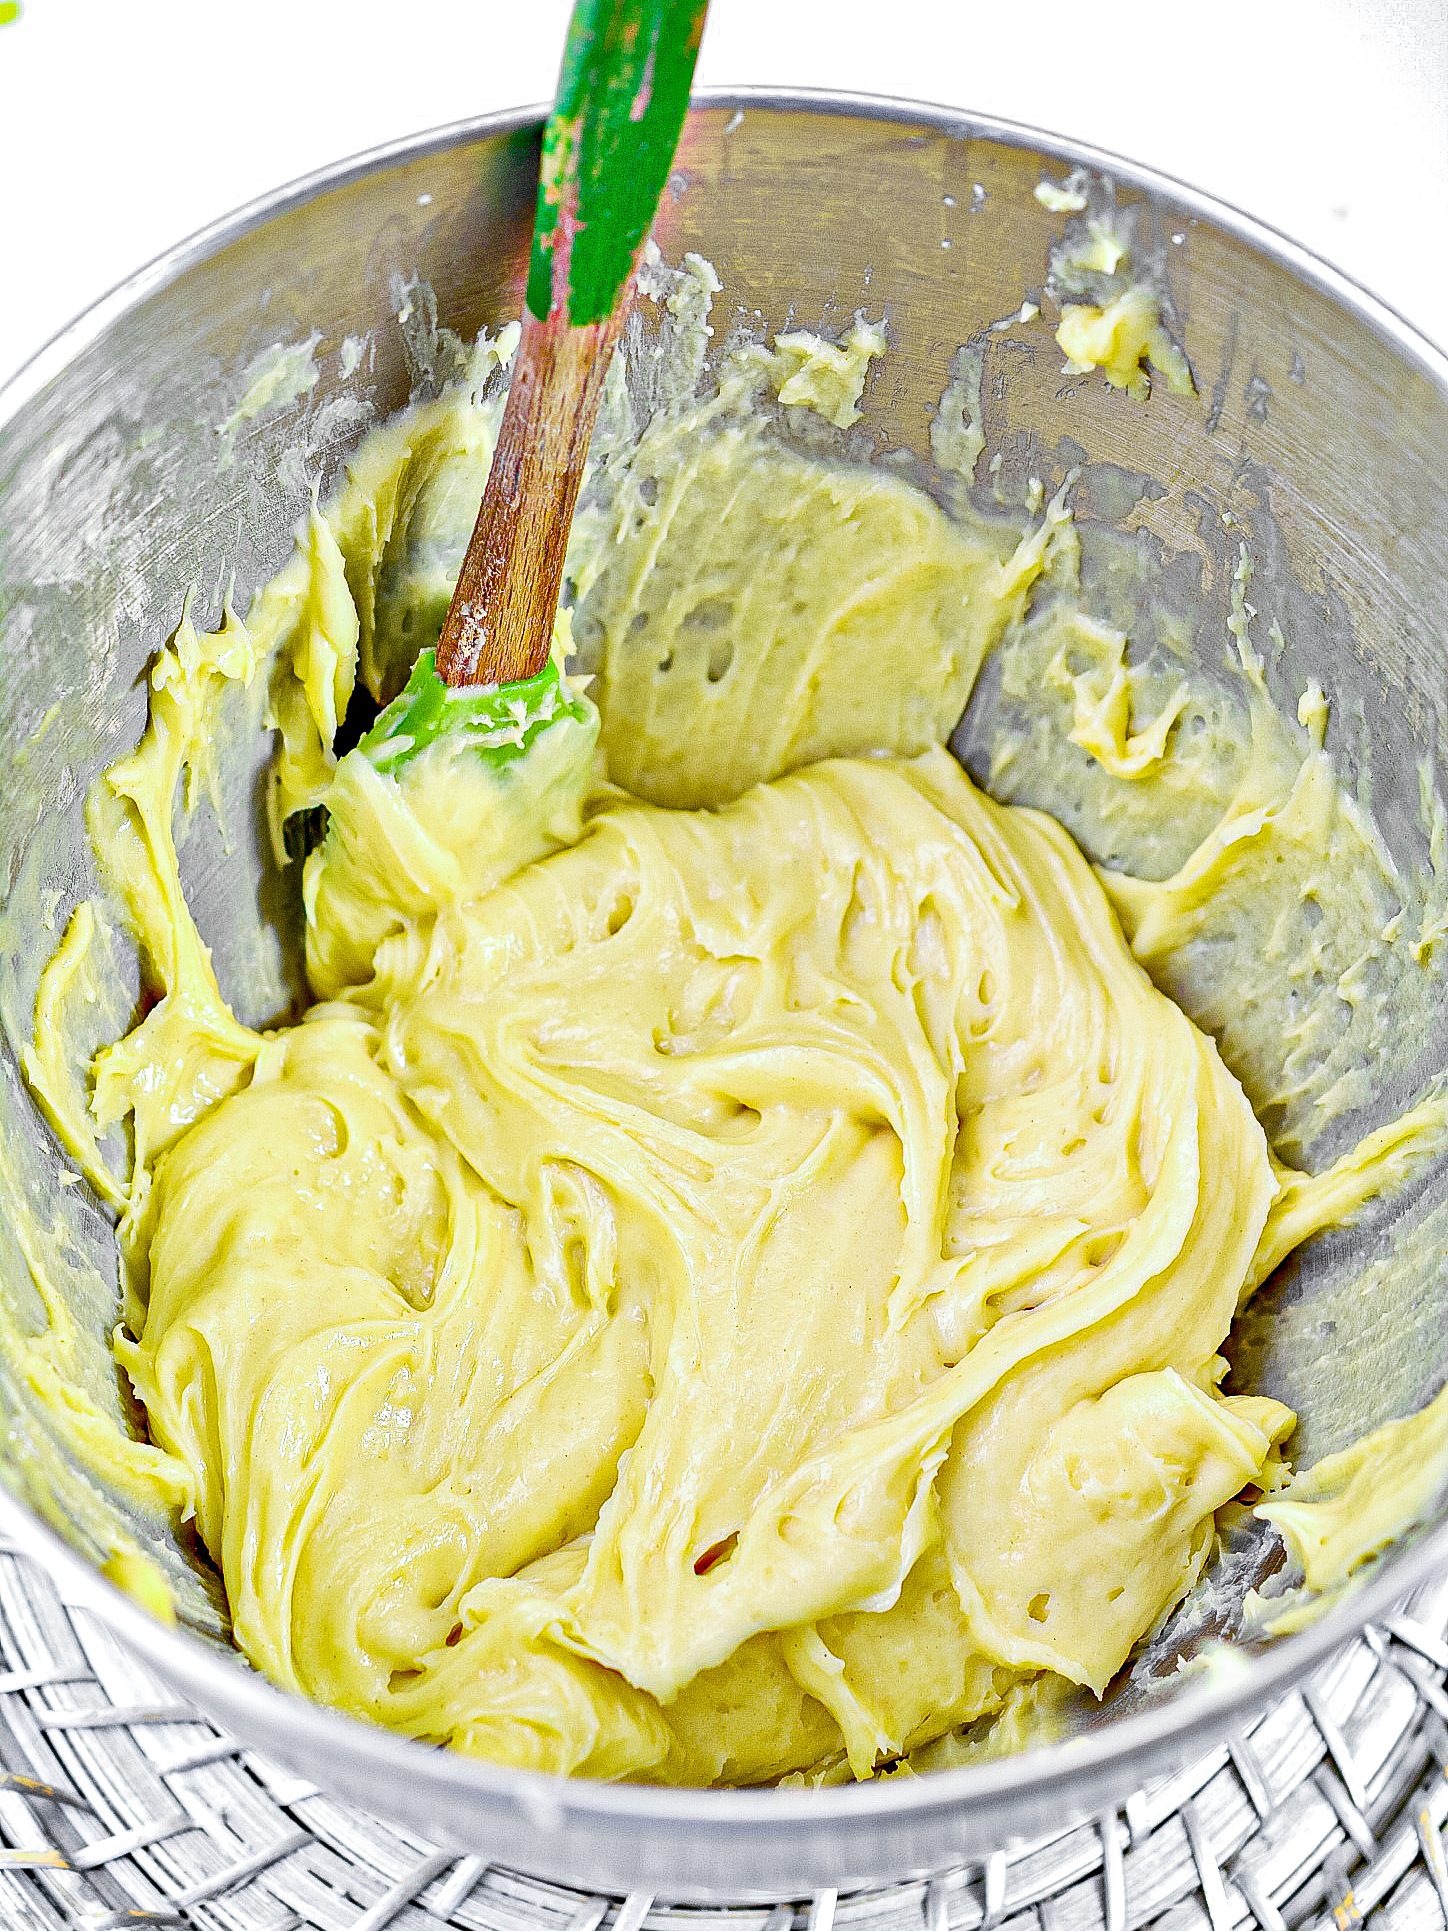 Mix the eggs into the dough one at a time. Be sure each egg is completely combined before adding another.